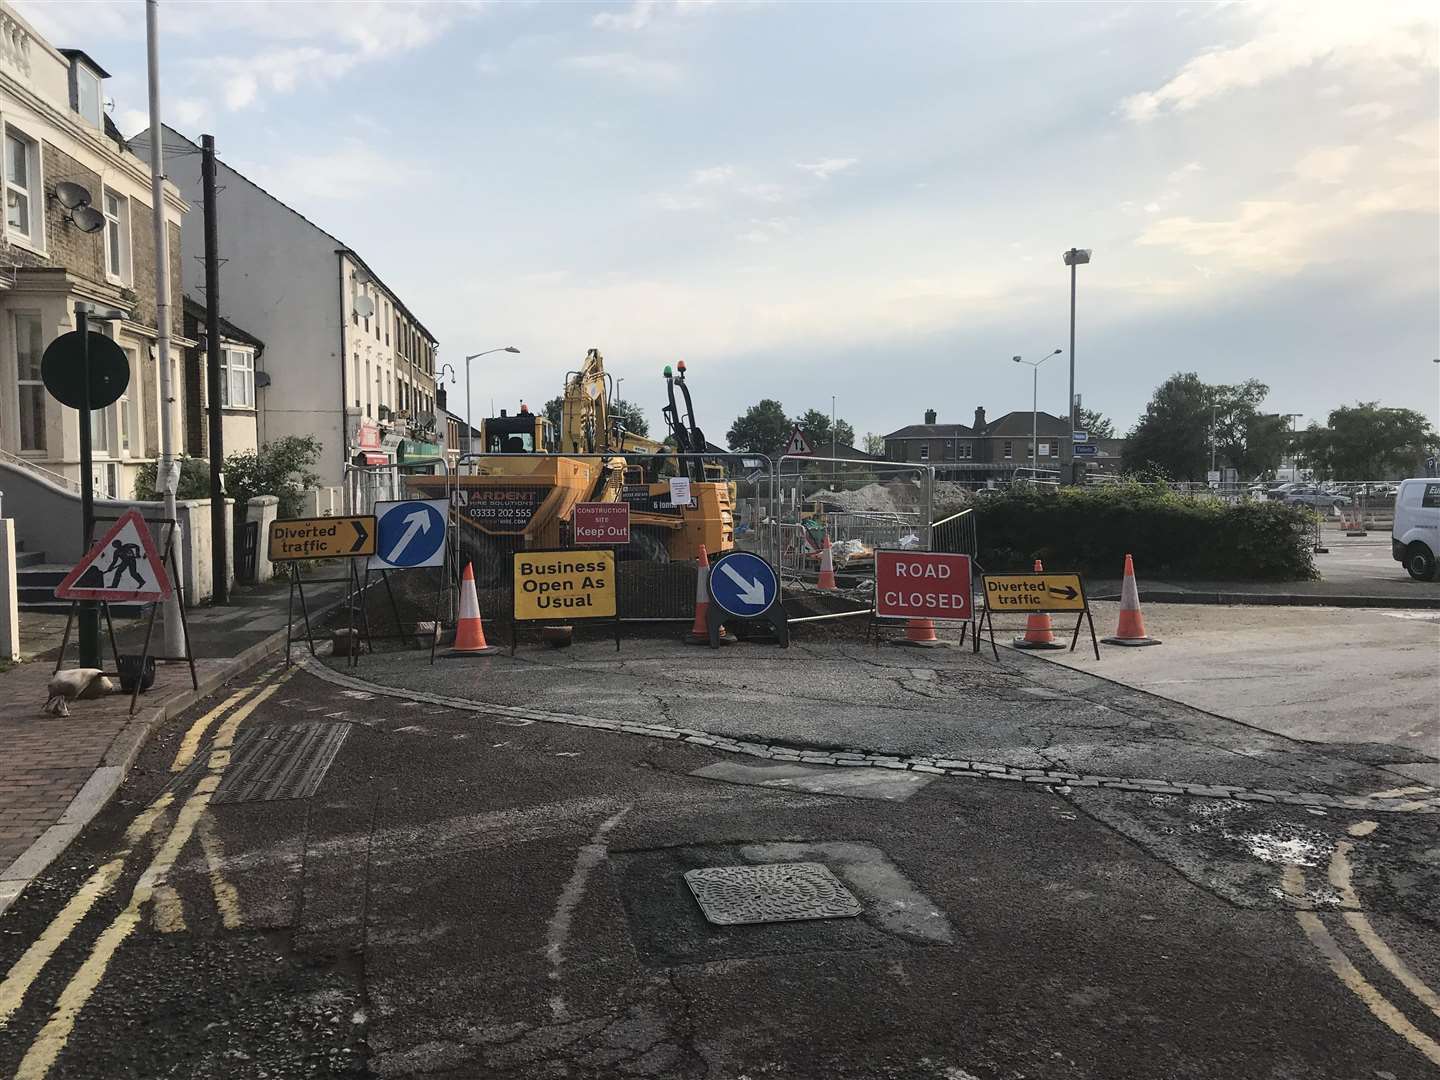 The next phase of roadworks has been postponed